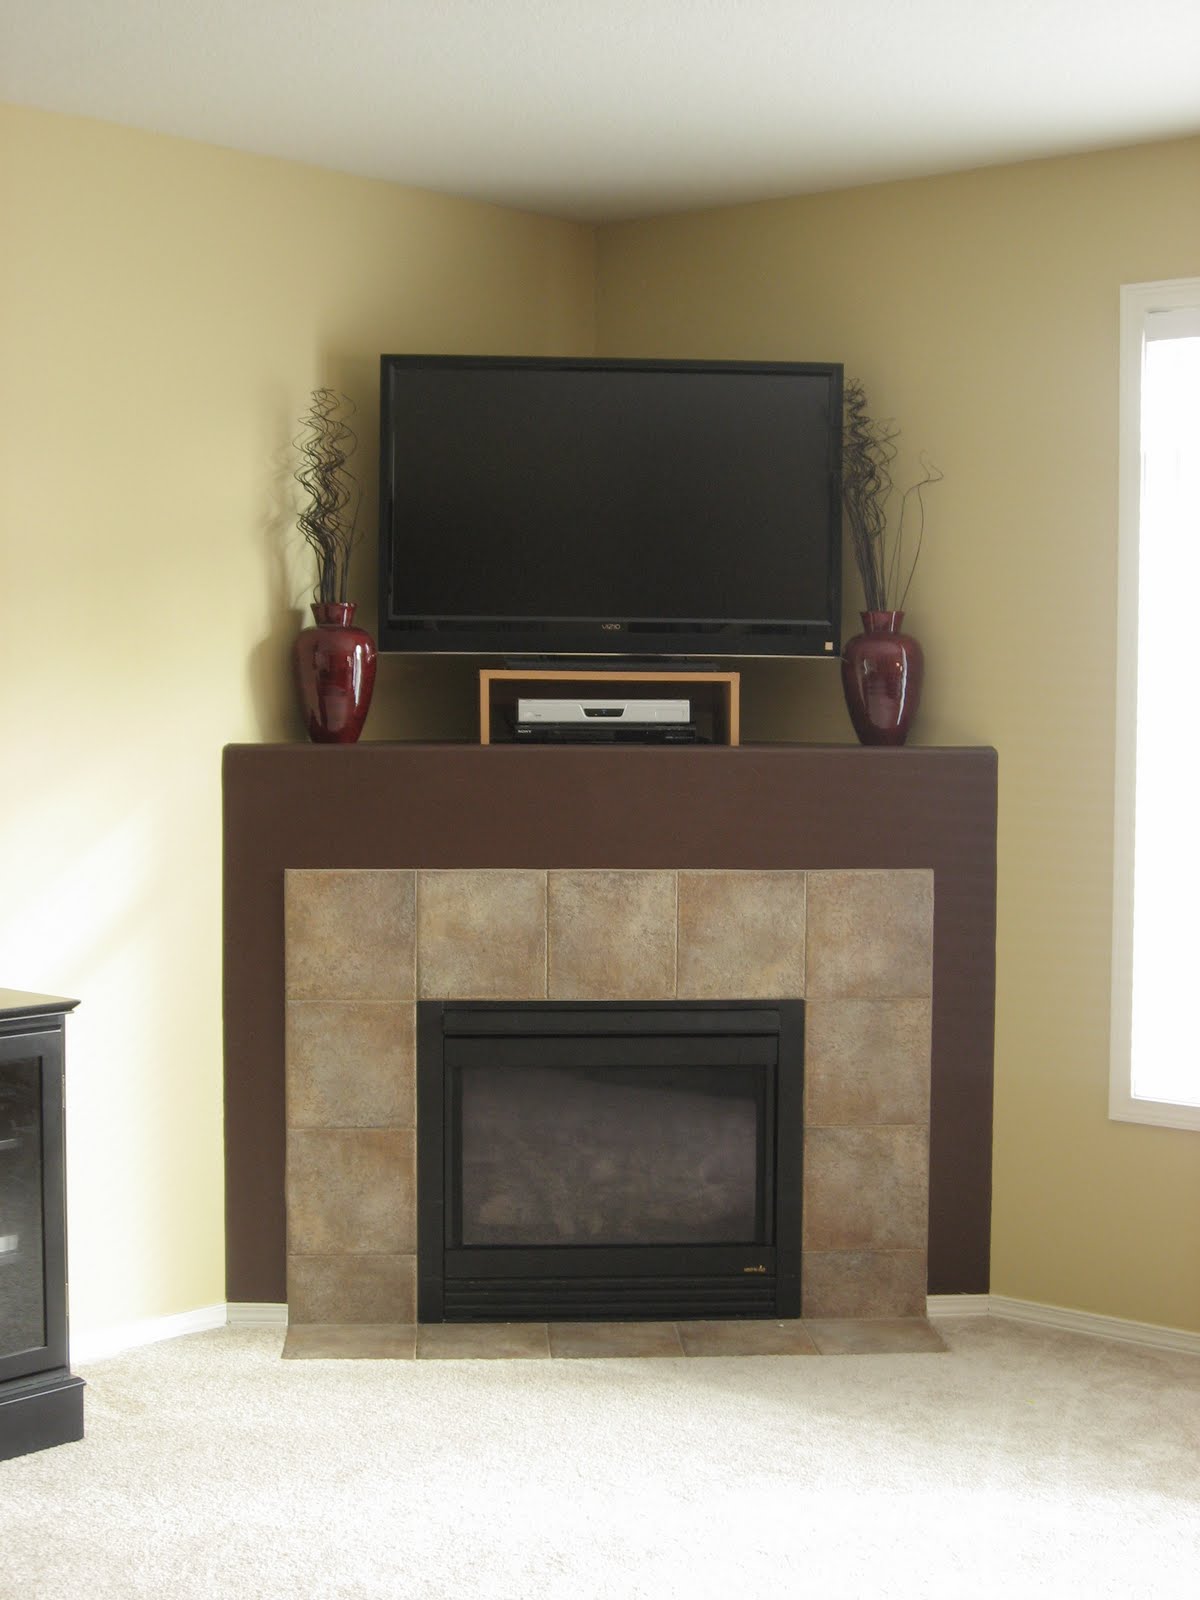 Starter home to Dream home: Fireplace: Part One